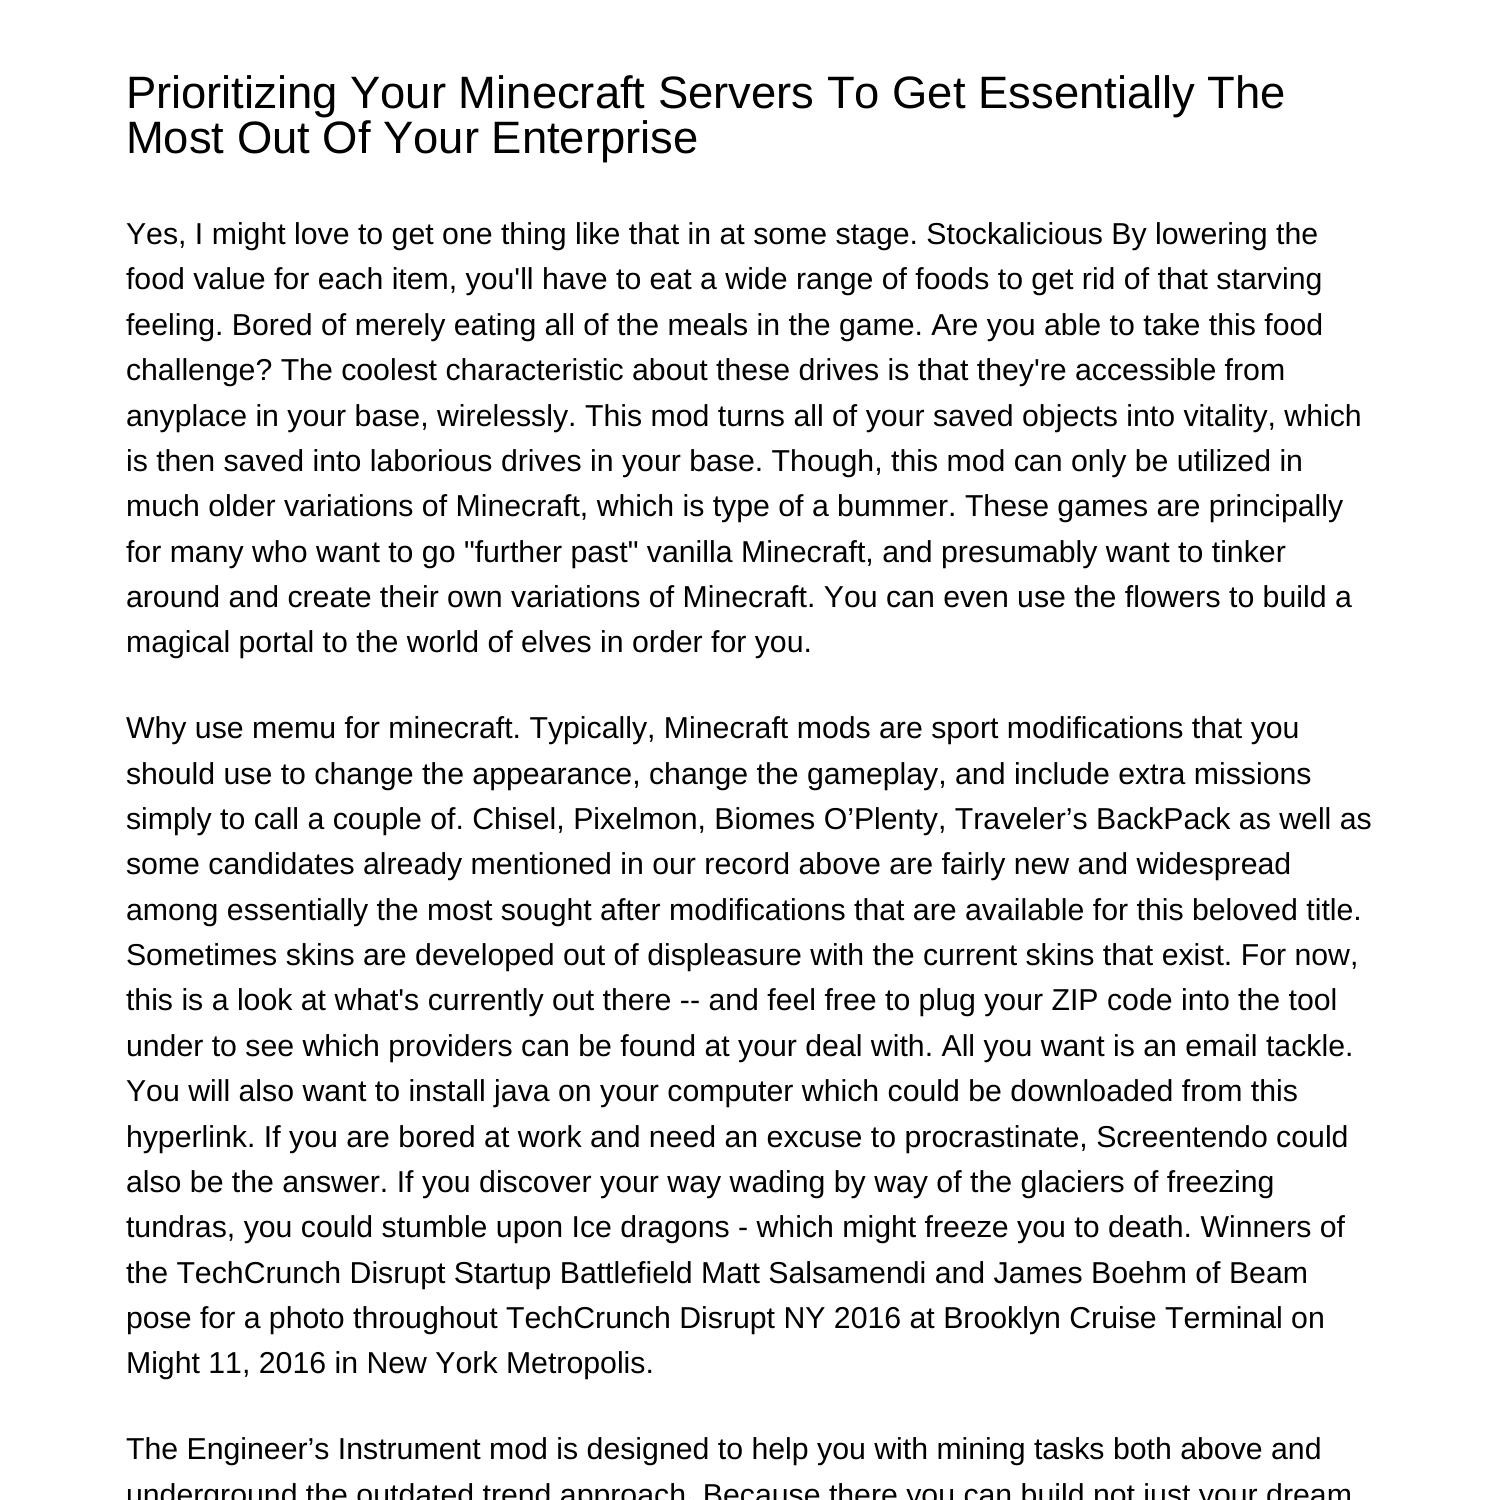 Prioritizing Your Minecraft Servers To Get Probably The Most Out Of Your Corporationnksez Pdf